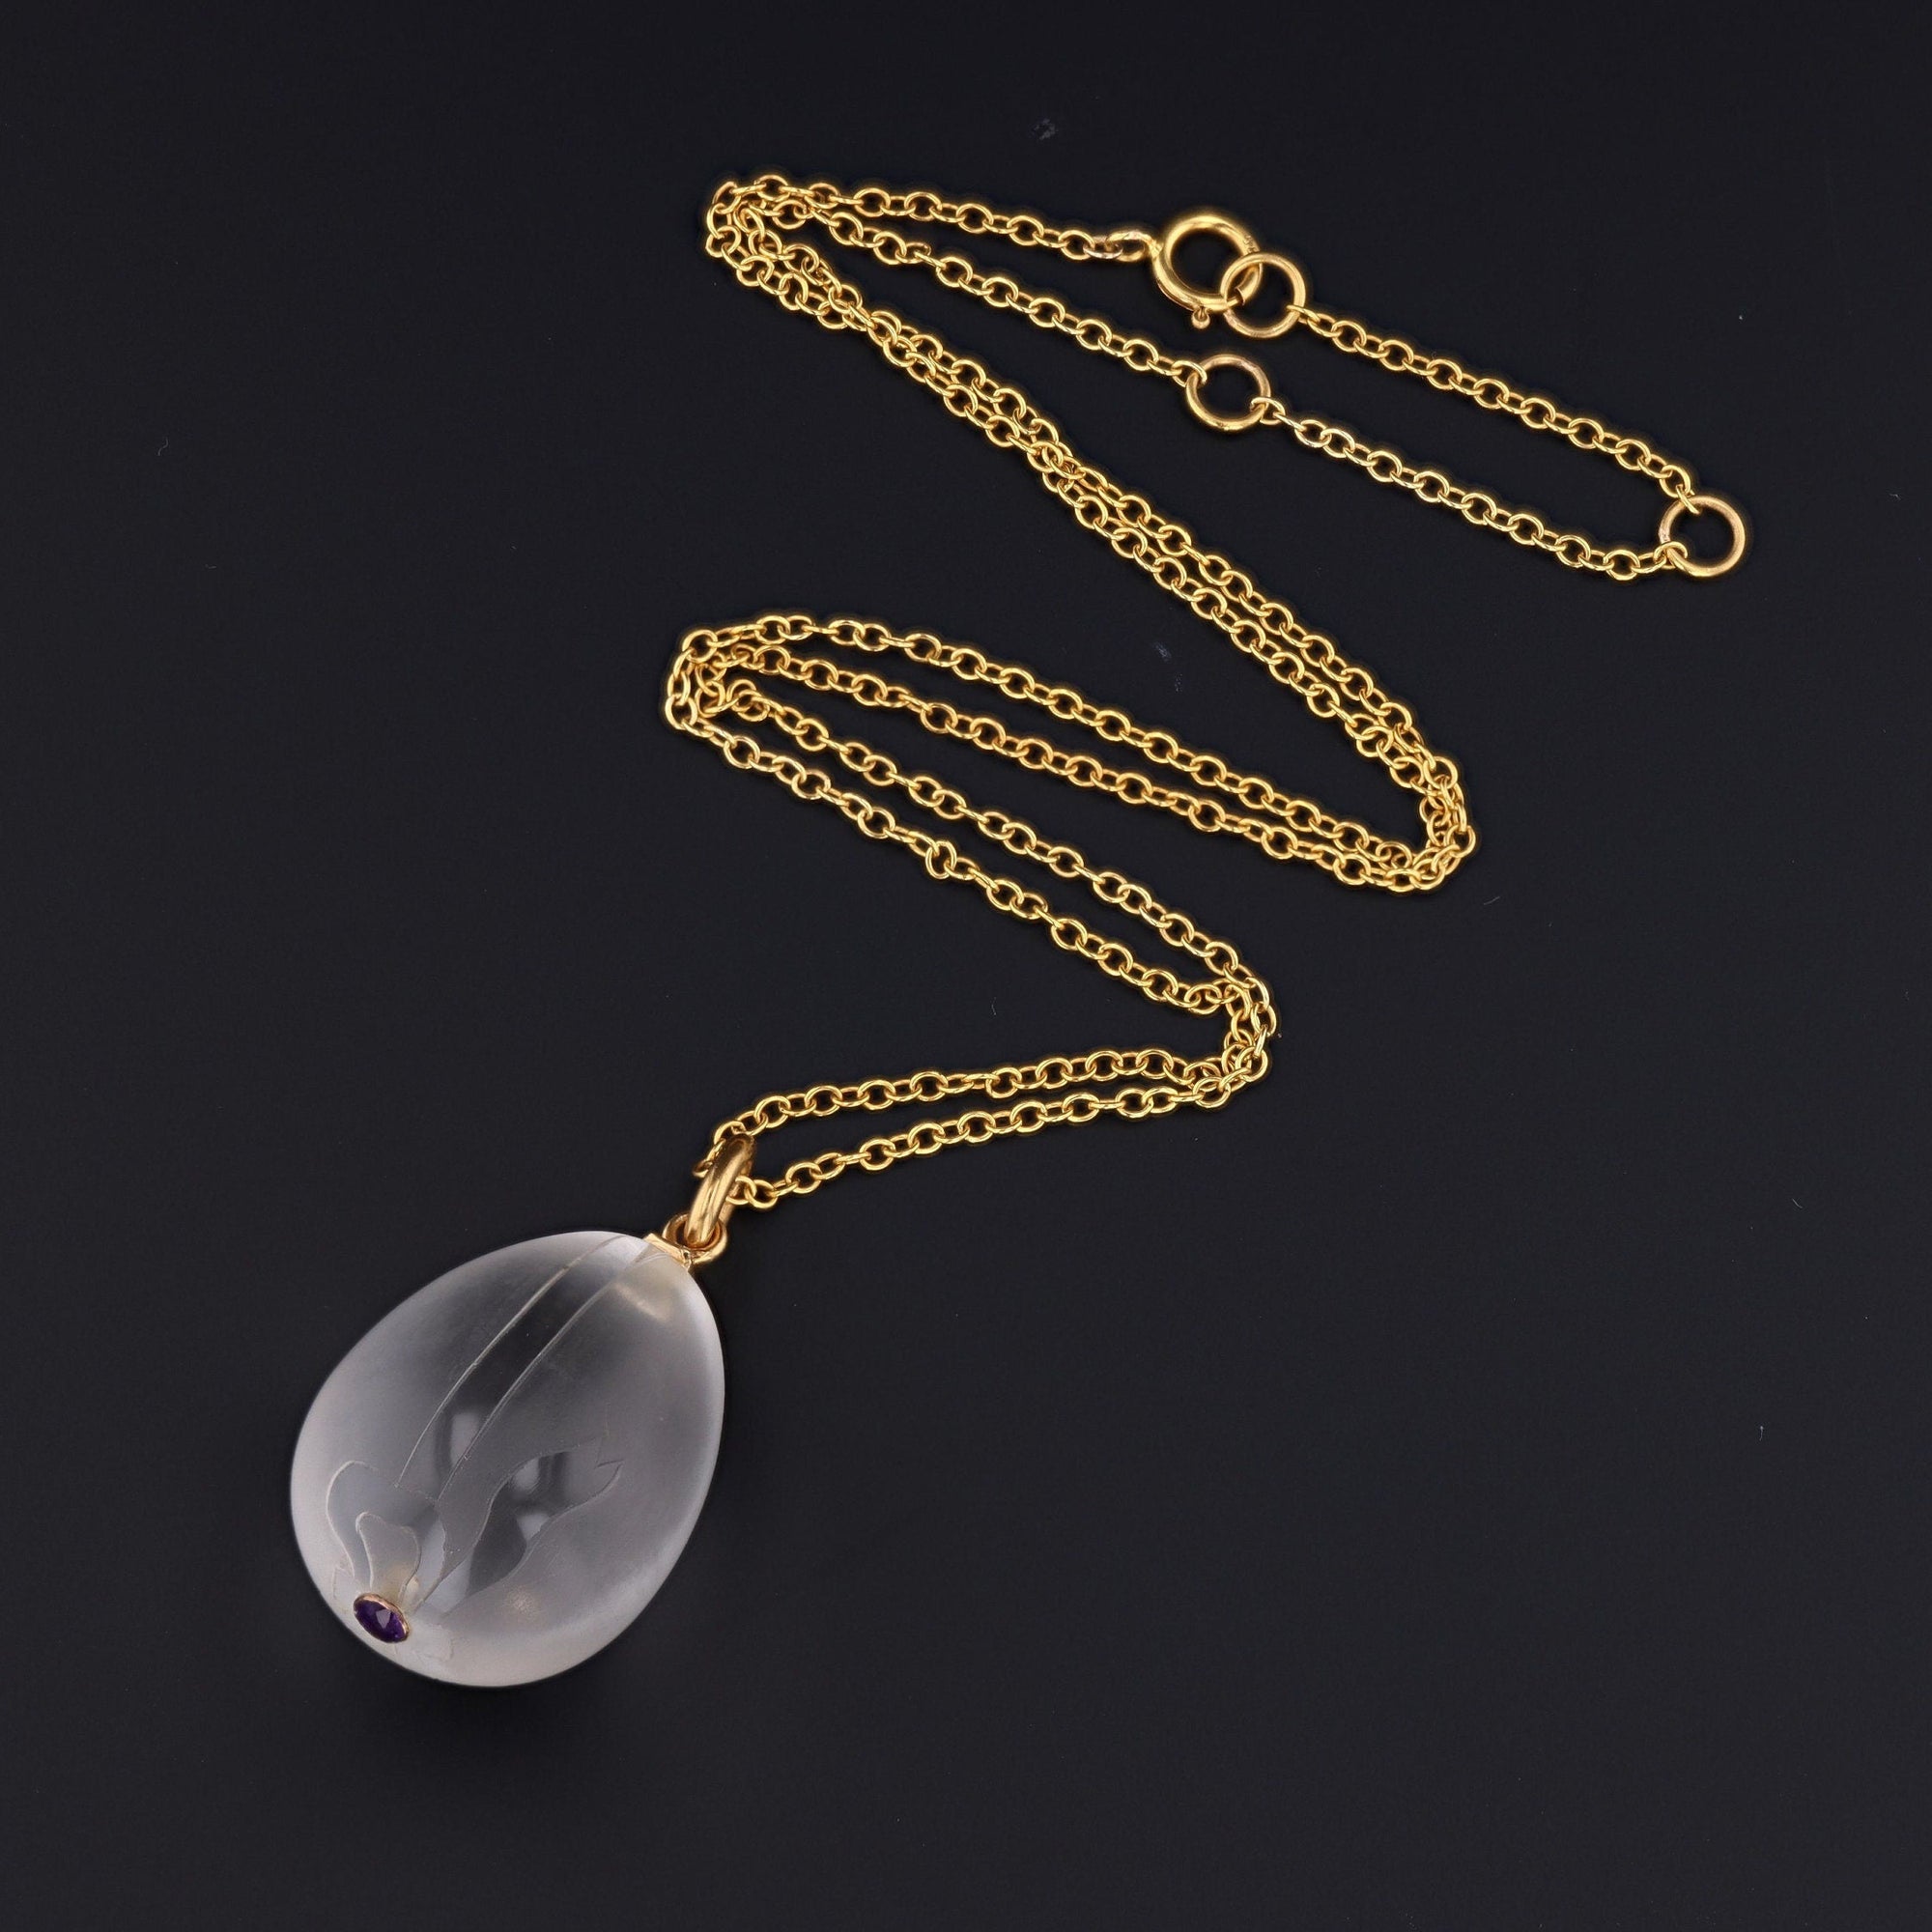 Rock Crystal Egg Pendant with Amethyst | 14k Gold Pendant with Optional 14k Gold Chain 